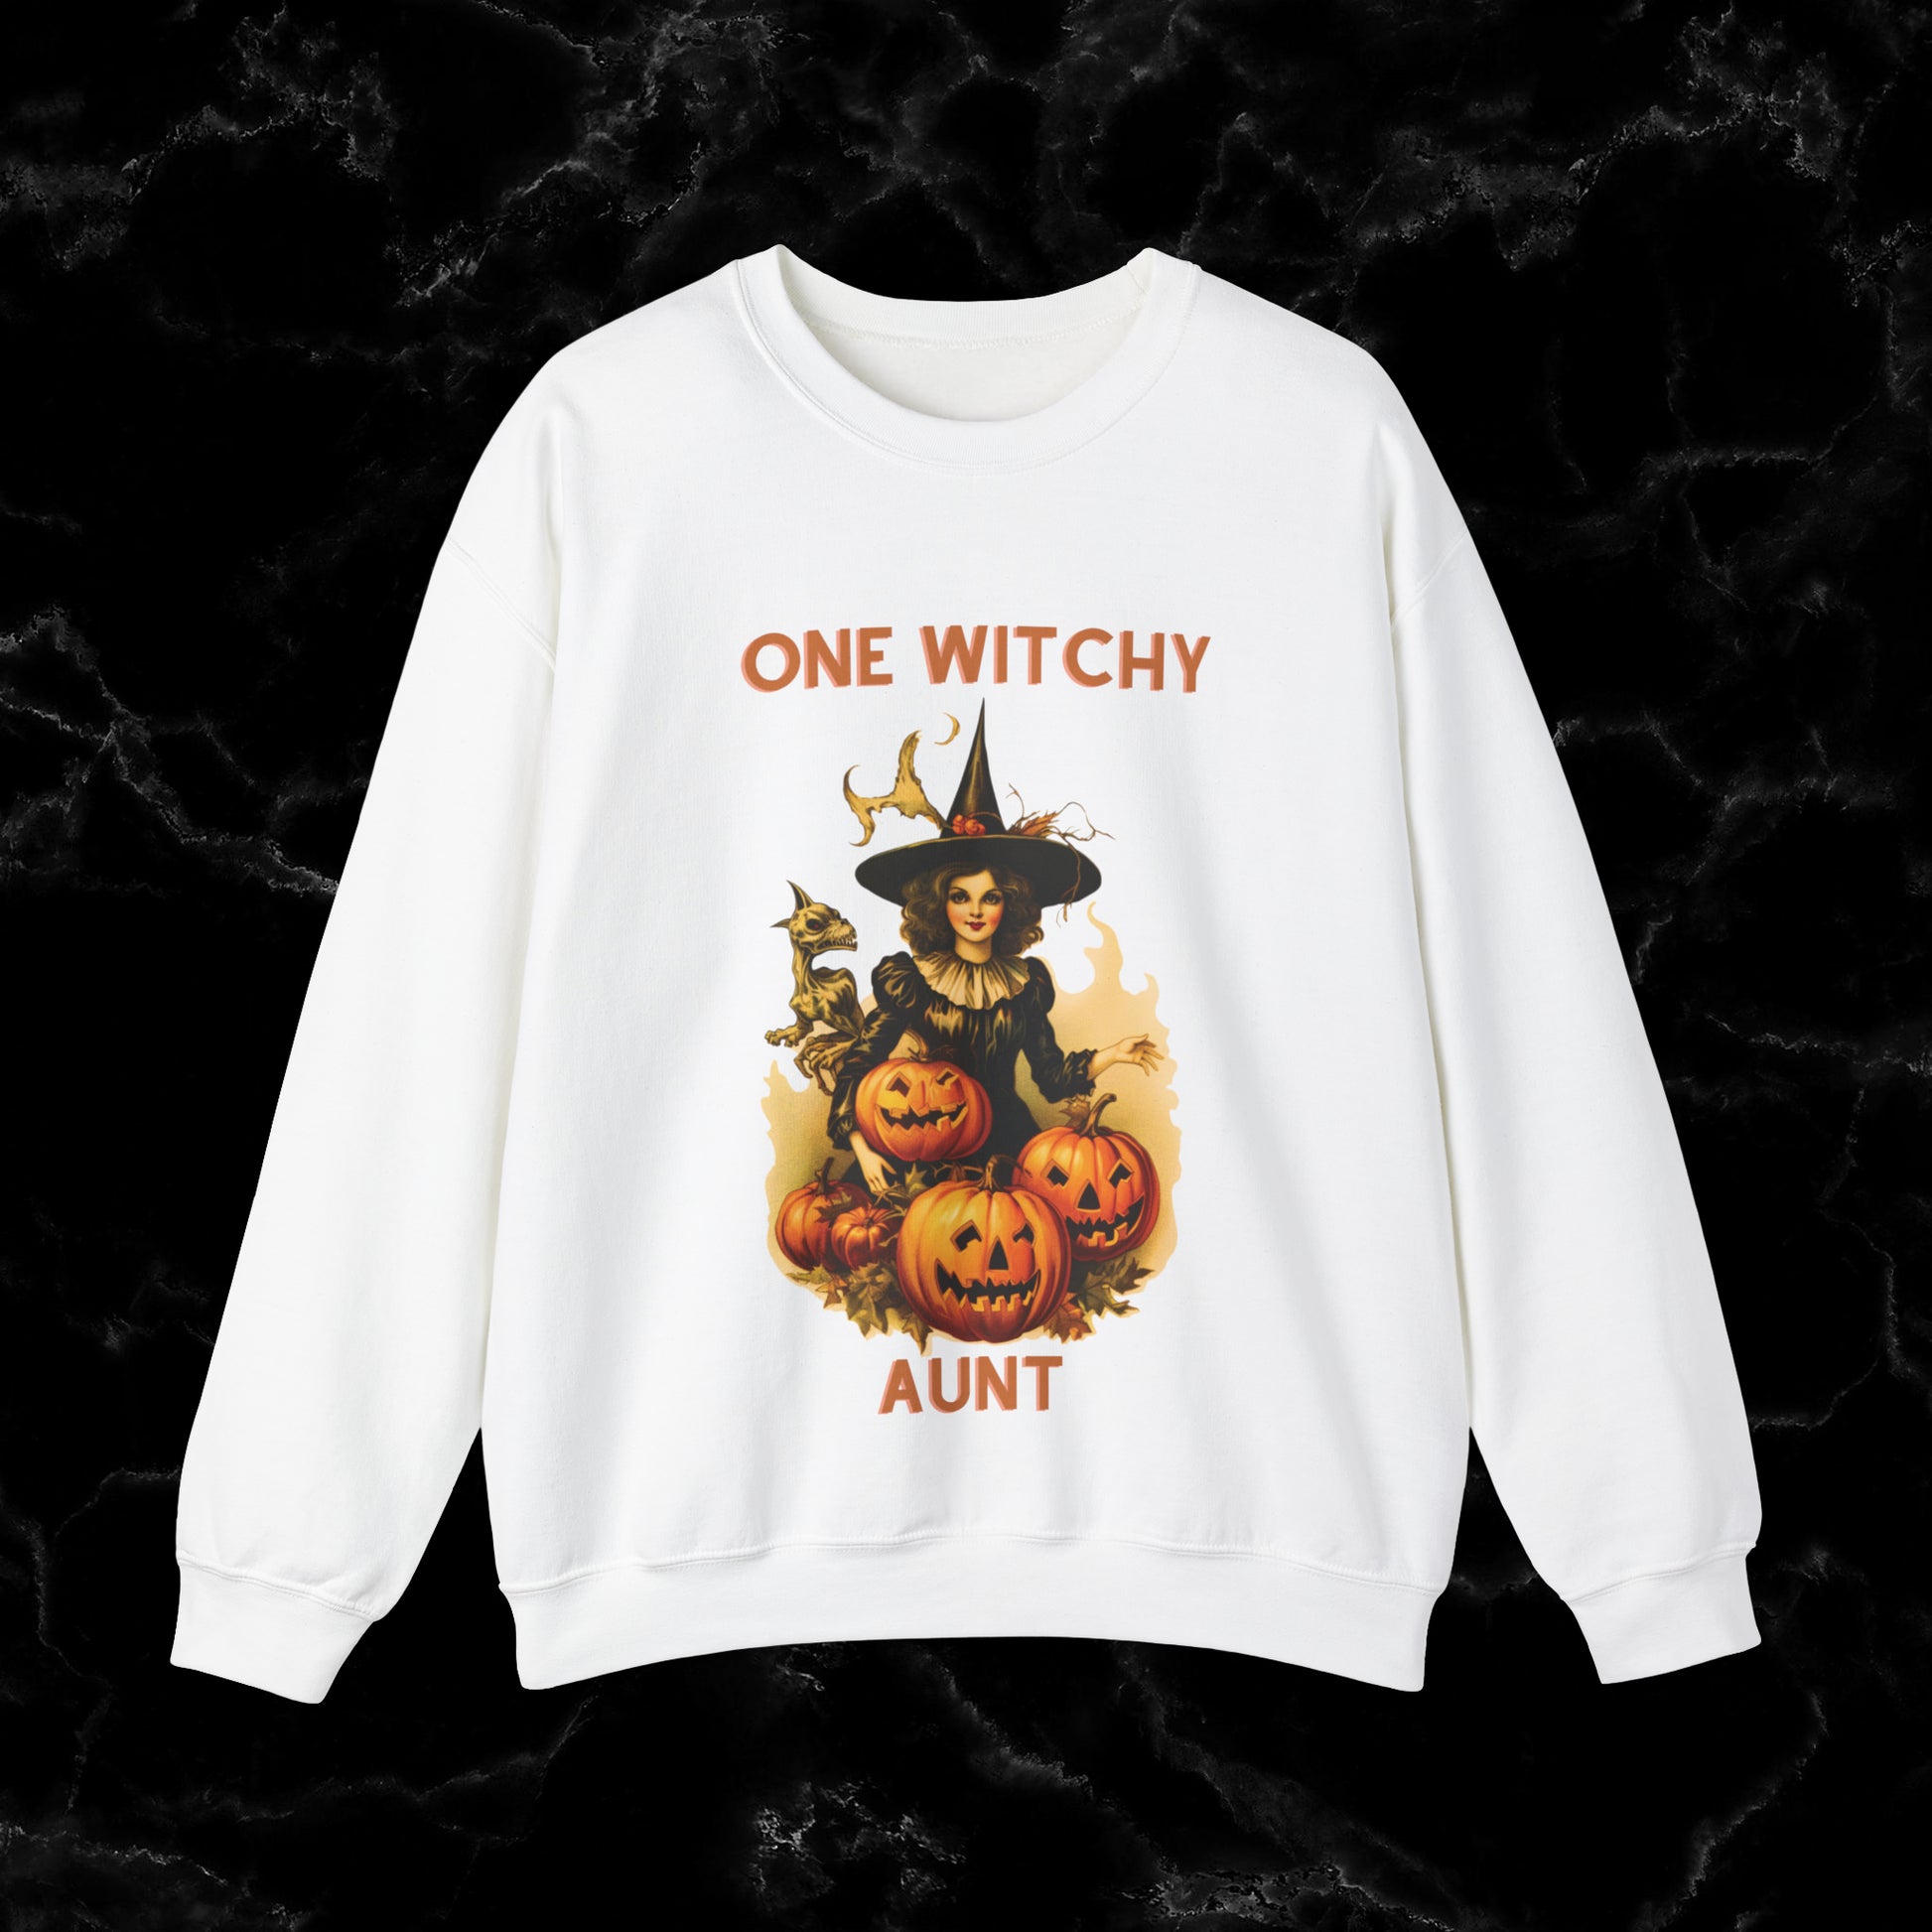 One Witchy Aunt Sweatshirt - Cool Aunt Shirt, Feral Aunt Sweatshirt, Perfect Gifts for Aunts, Auntie Sweatshirt Sweatshirt S White 